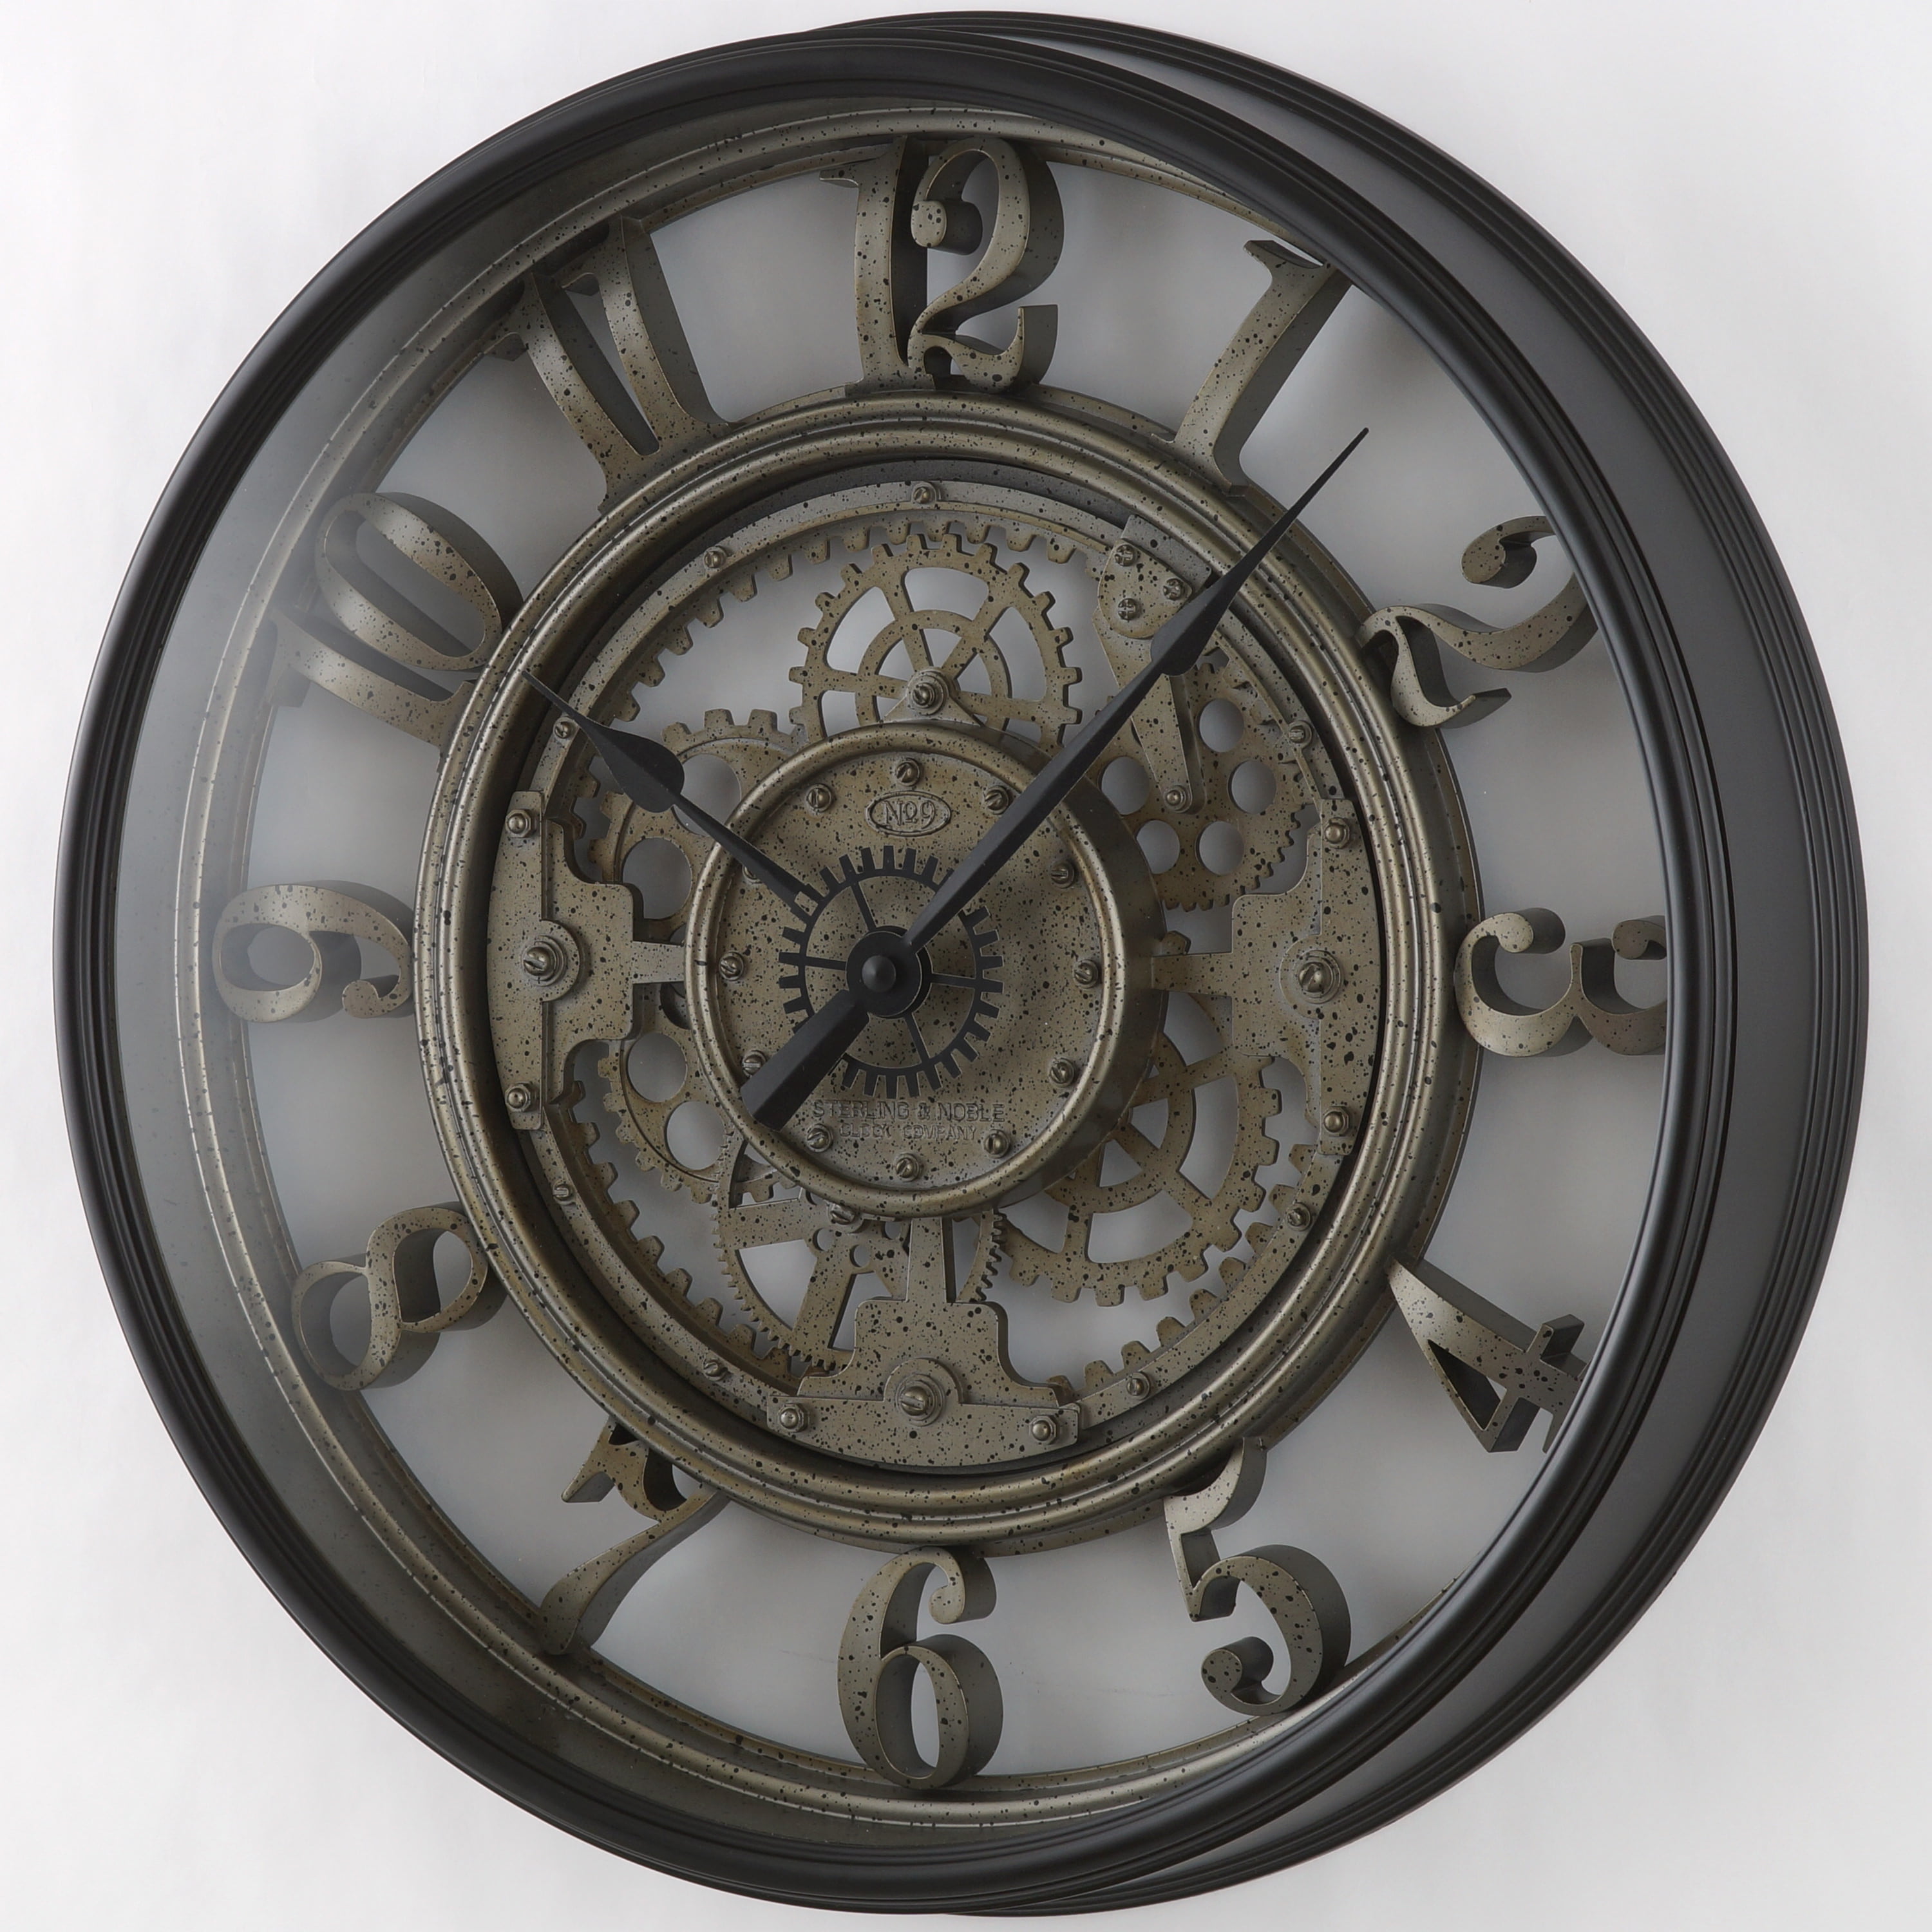 Vintage Rustic Industrial Oversized Large Moving Gears Wall Clock Roman Numerals 